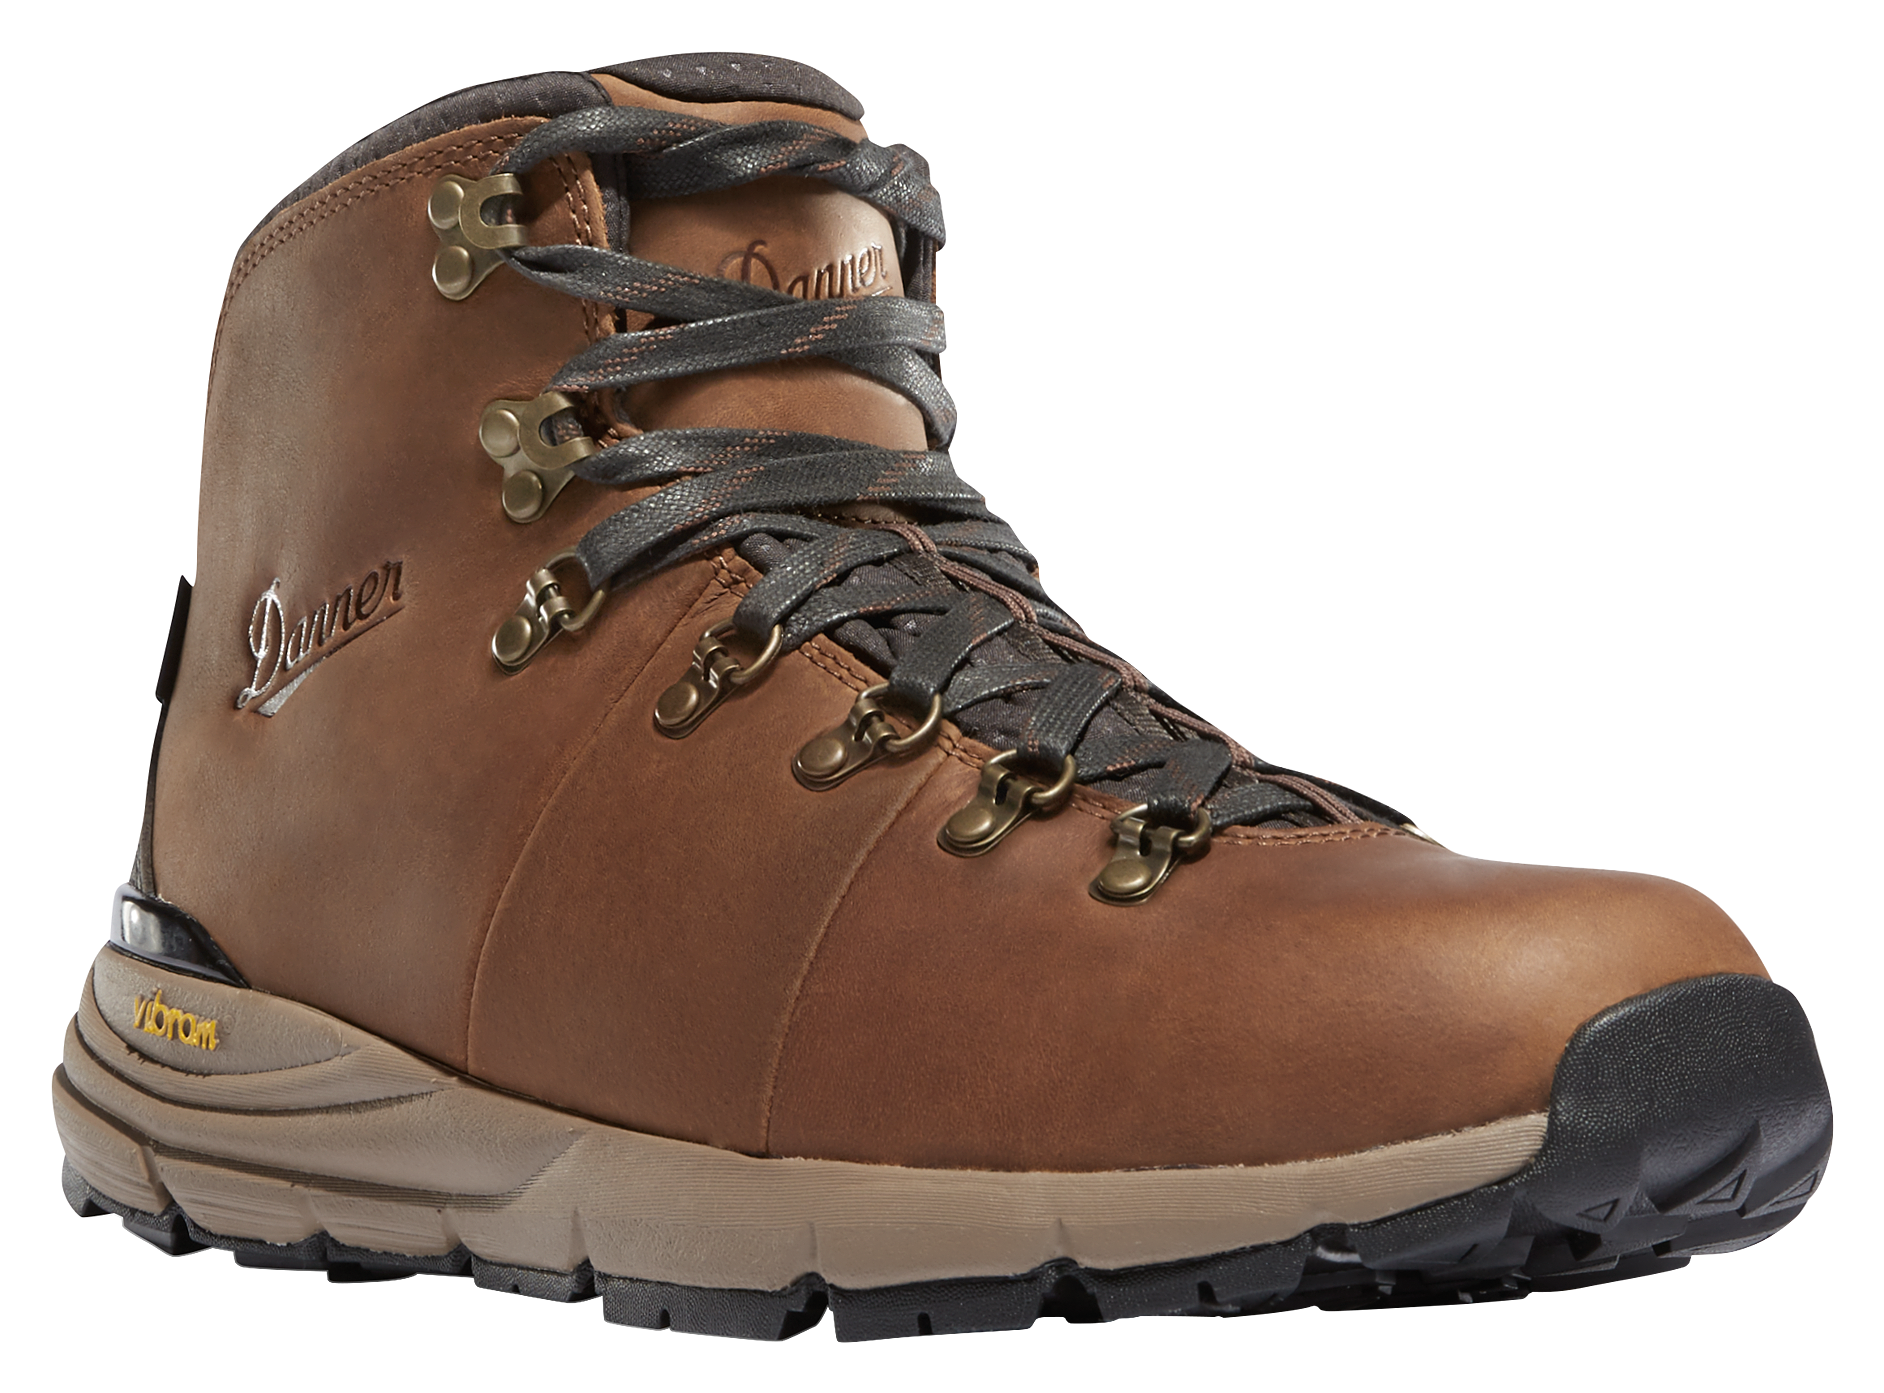 Danner Mountain 600 Waterproof Hiking Boots for Men - Rich Brown - 10M